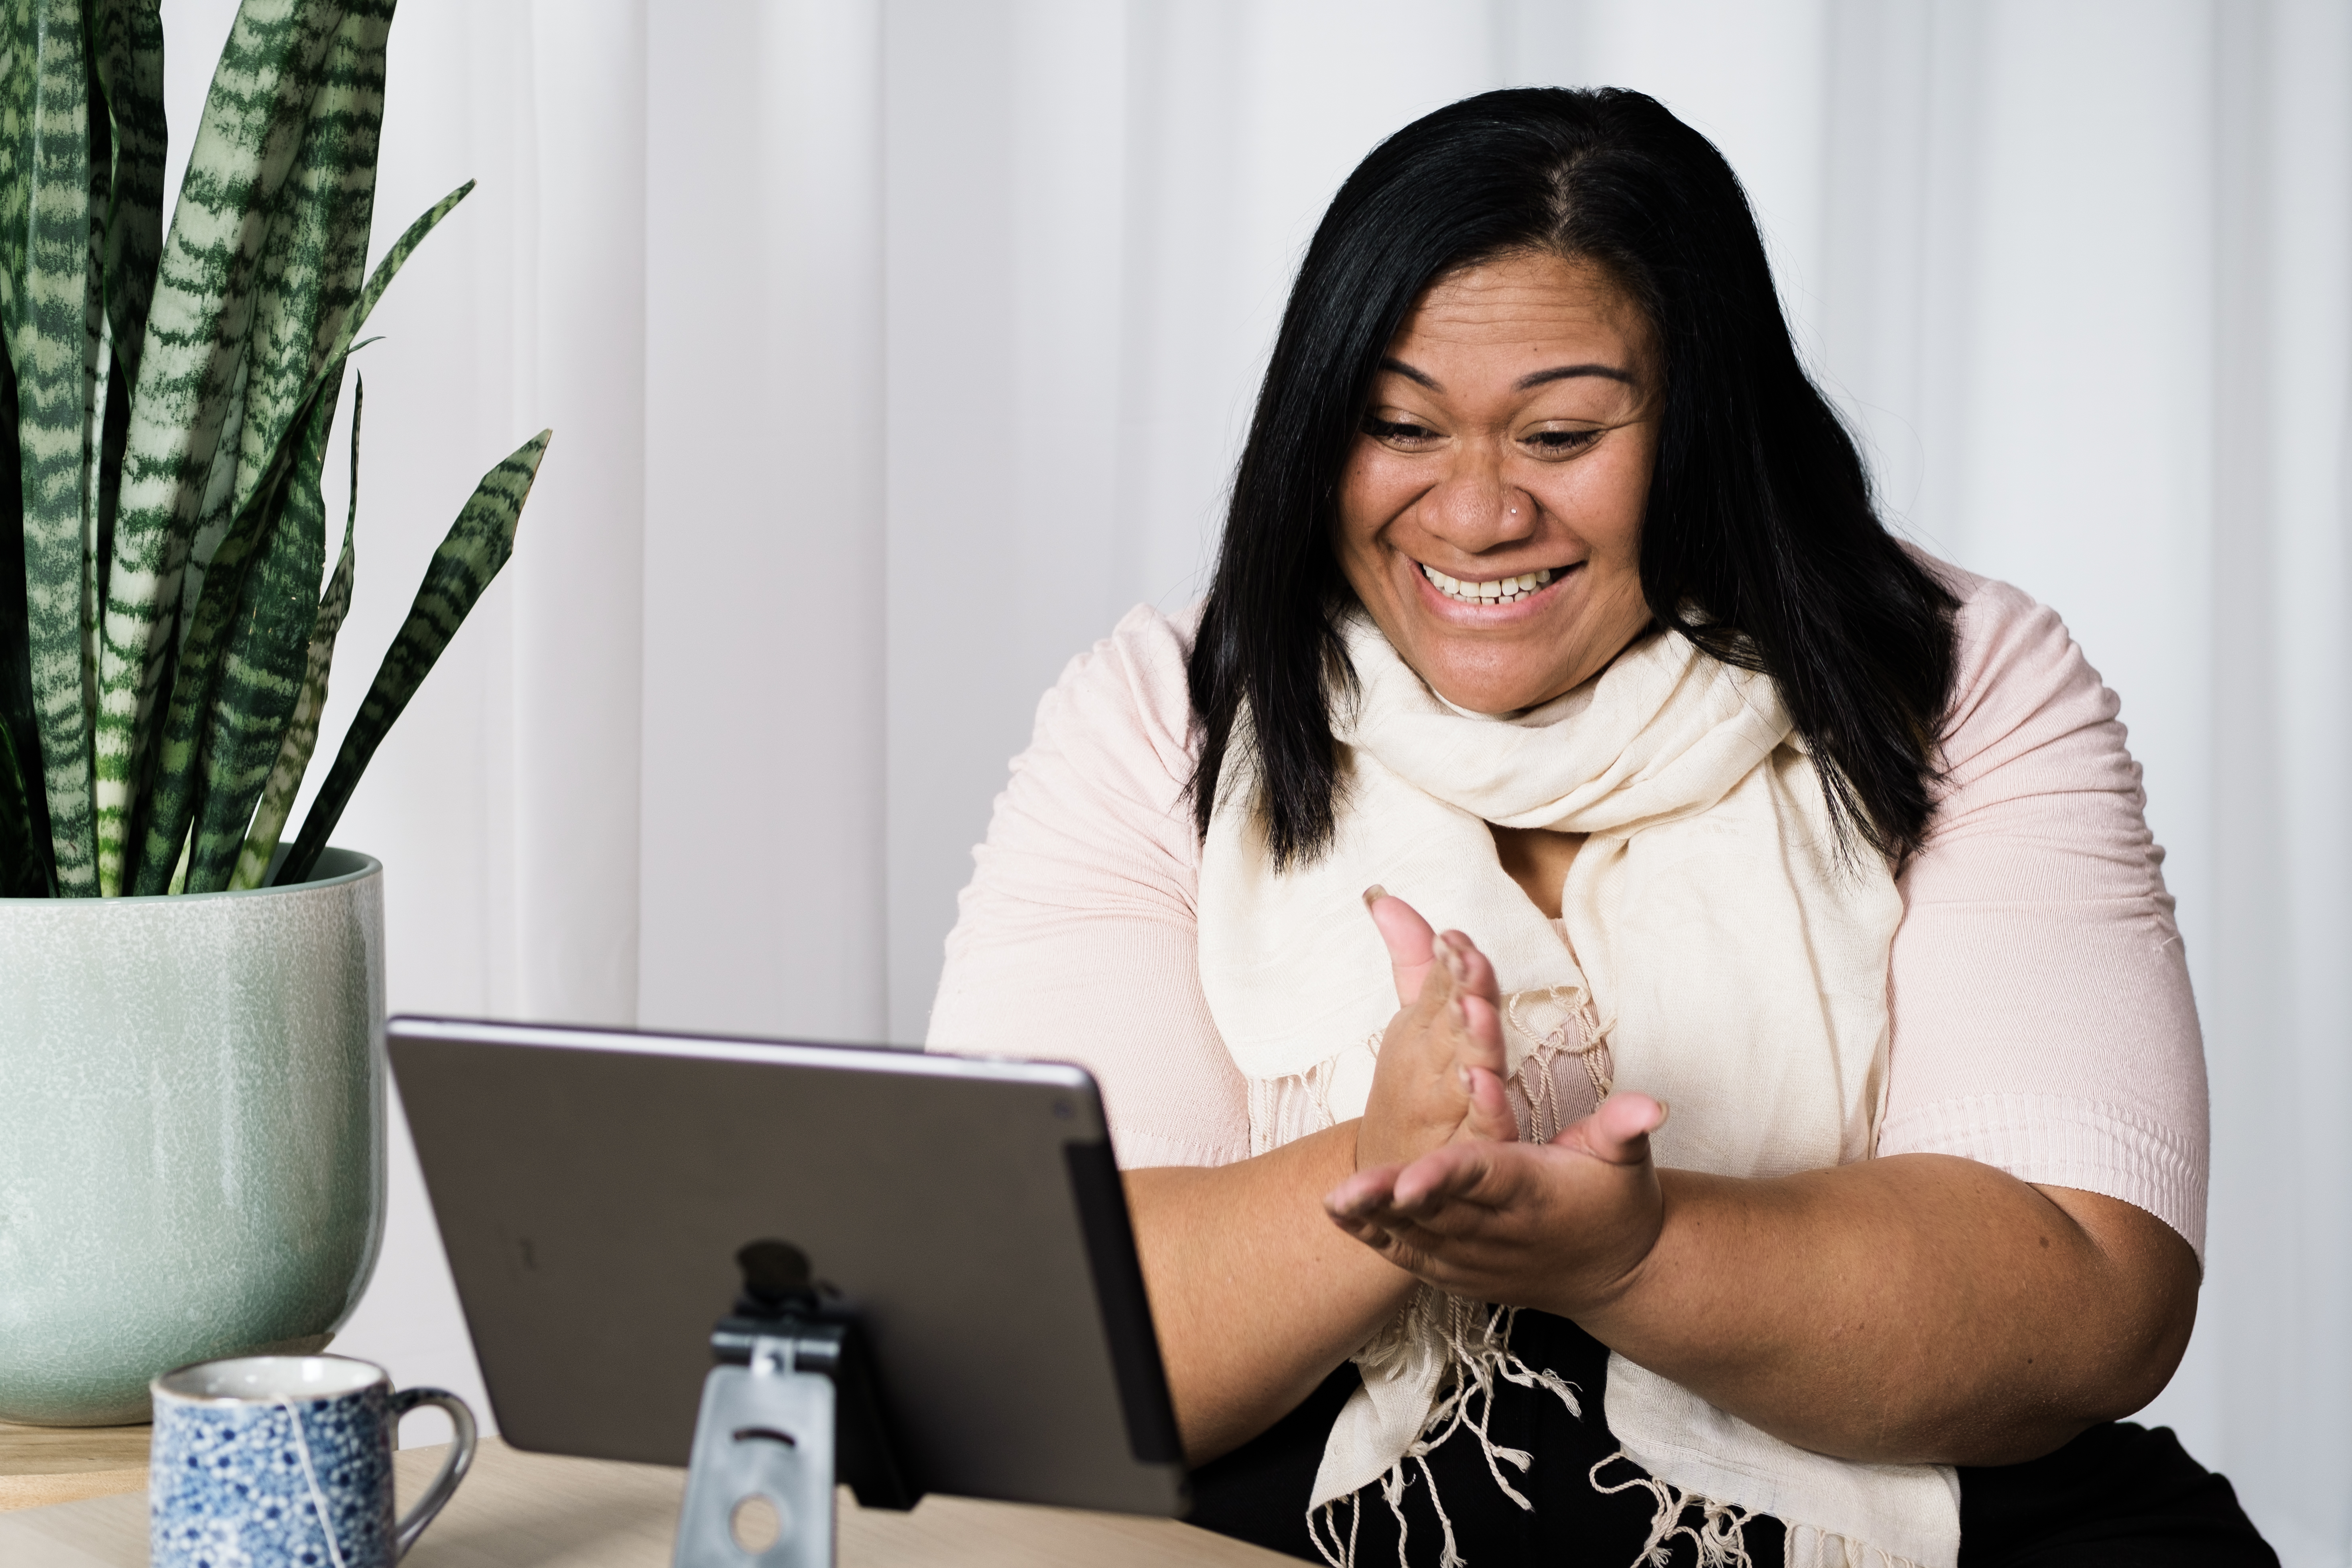 A Polynesian woman with a stylish long bob of black hair is wearing a light pink top and a white scarf. She is using sign language to communicate with someone through a video chat on her tablet. The woman is standing in front of an off-white curtain and an indoor plant, creating a pleasant and inviting background for the video call.